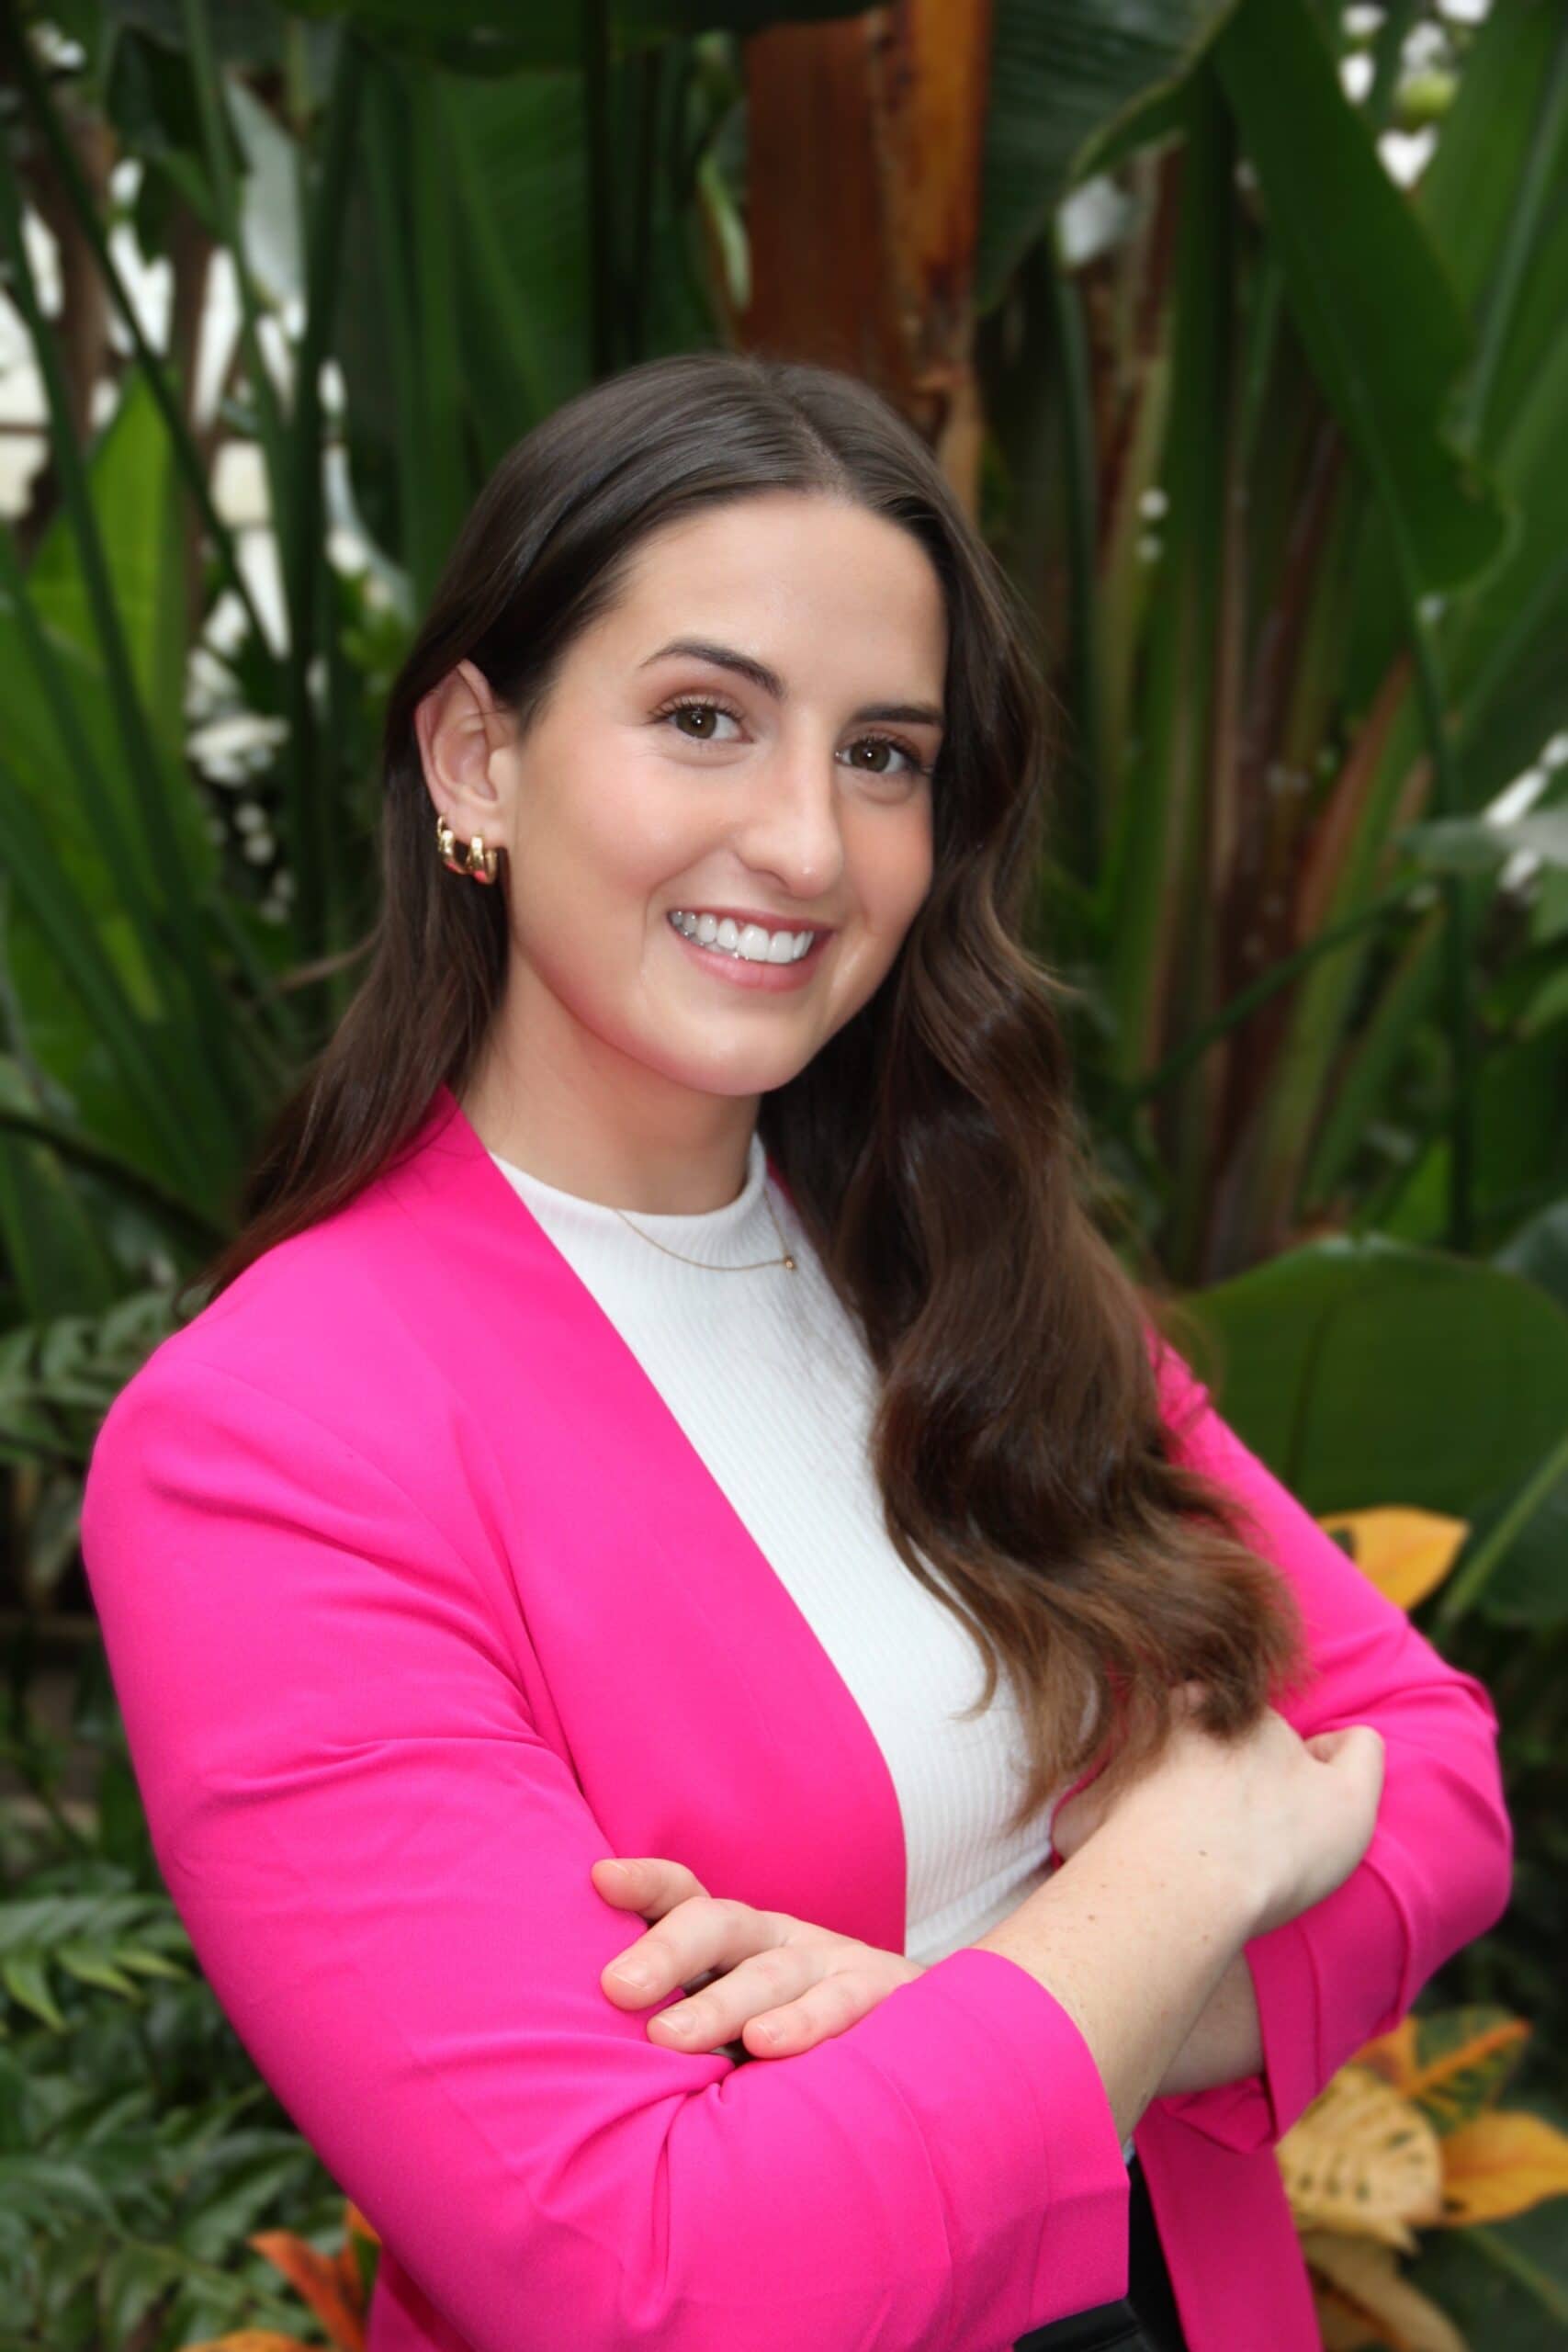 Sarah Herst, a researcher, stands with arms crossed in a pink jacket in front of trees